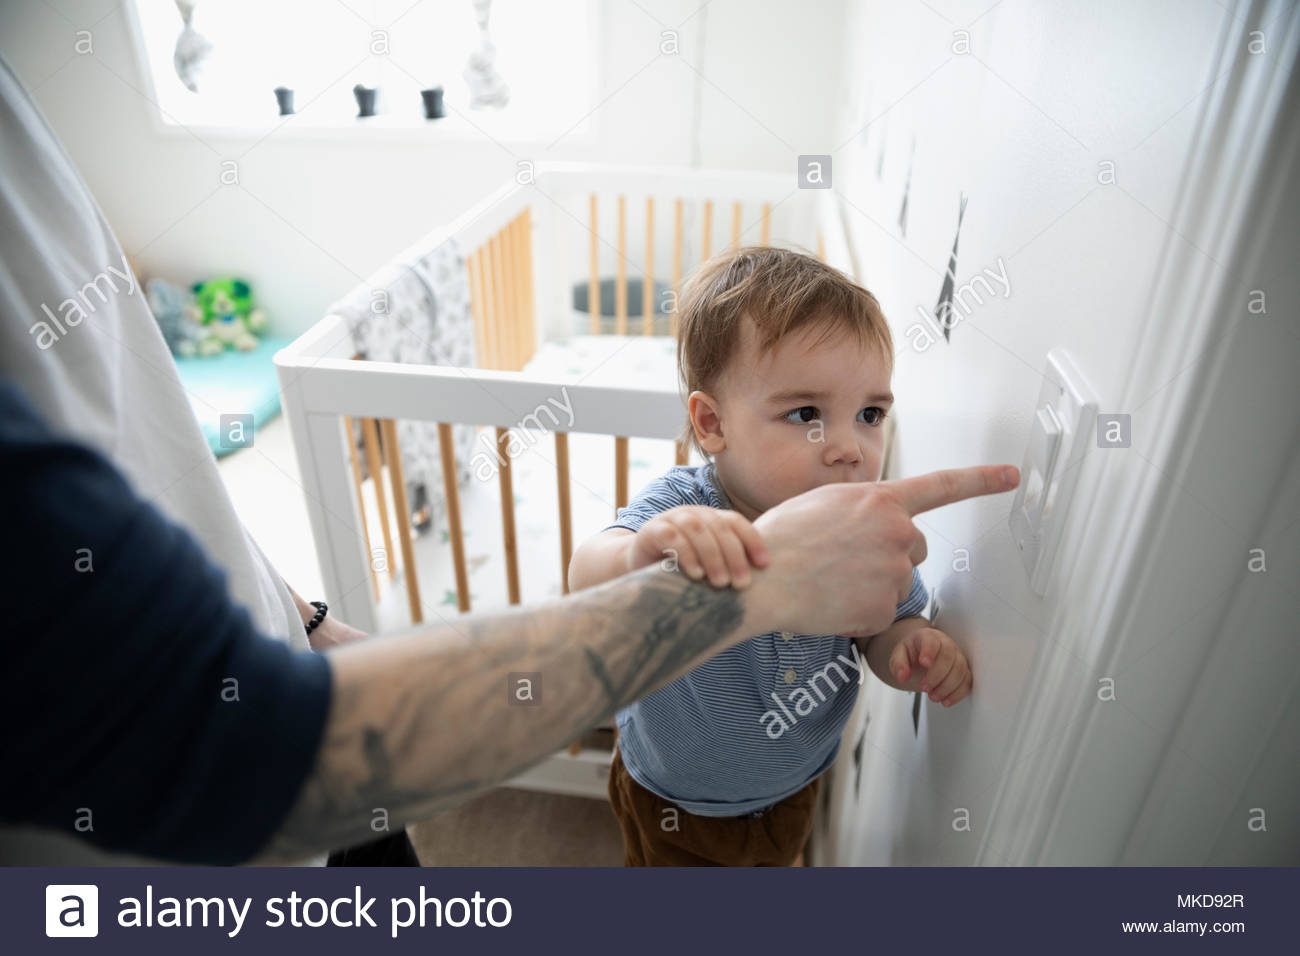 Curious son watching father pushing light switch in nursery Stock Photo